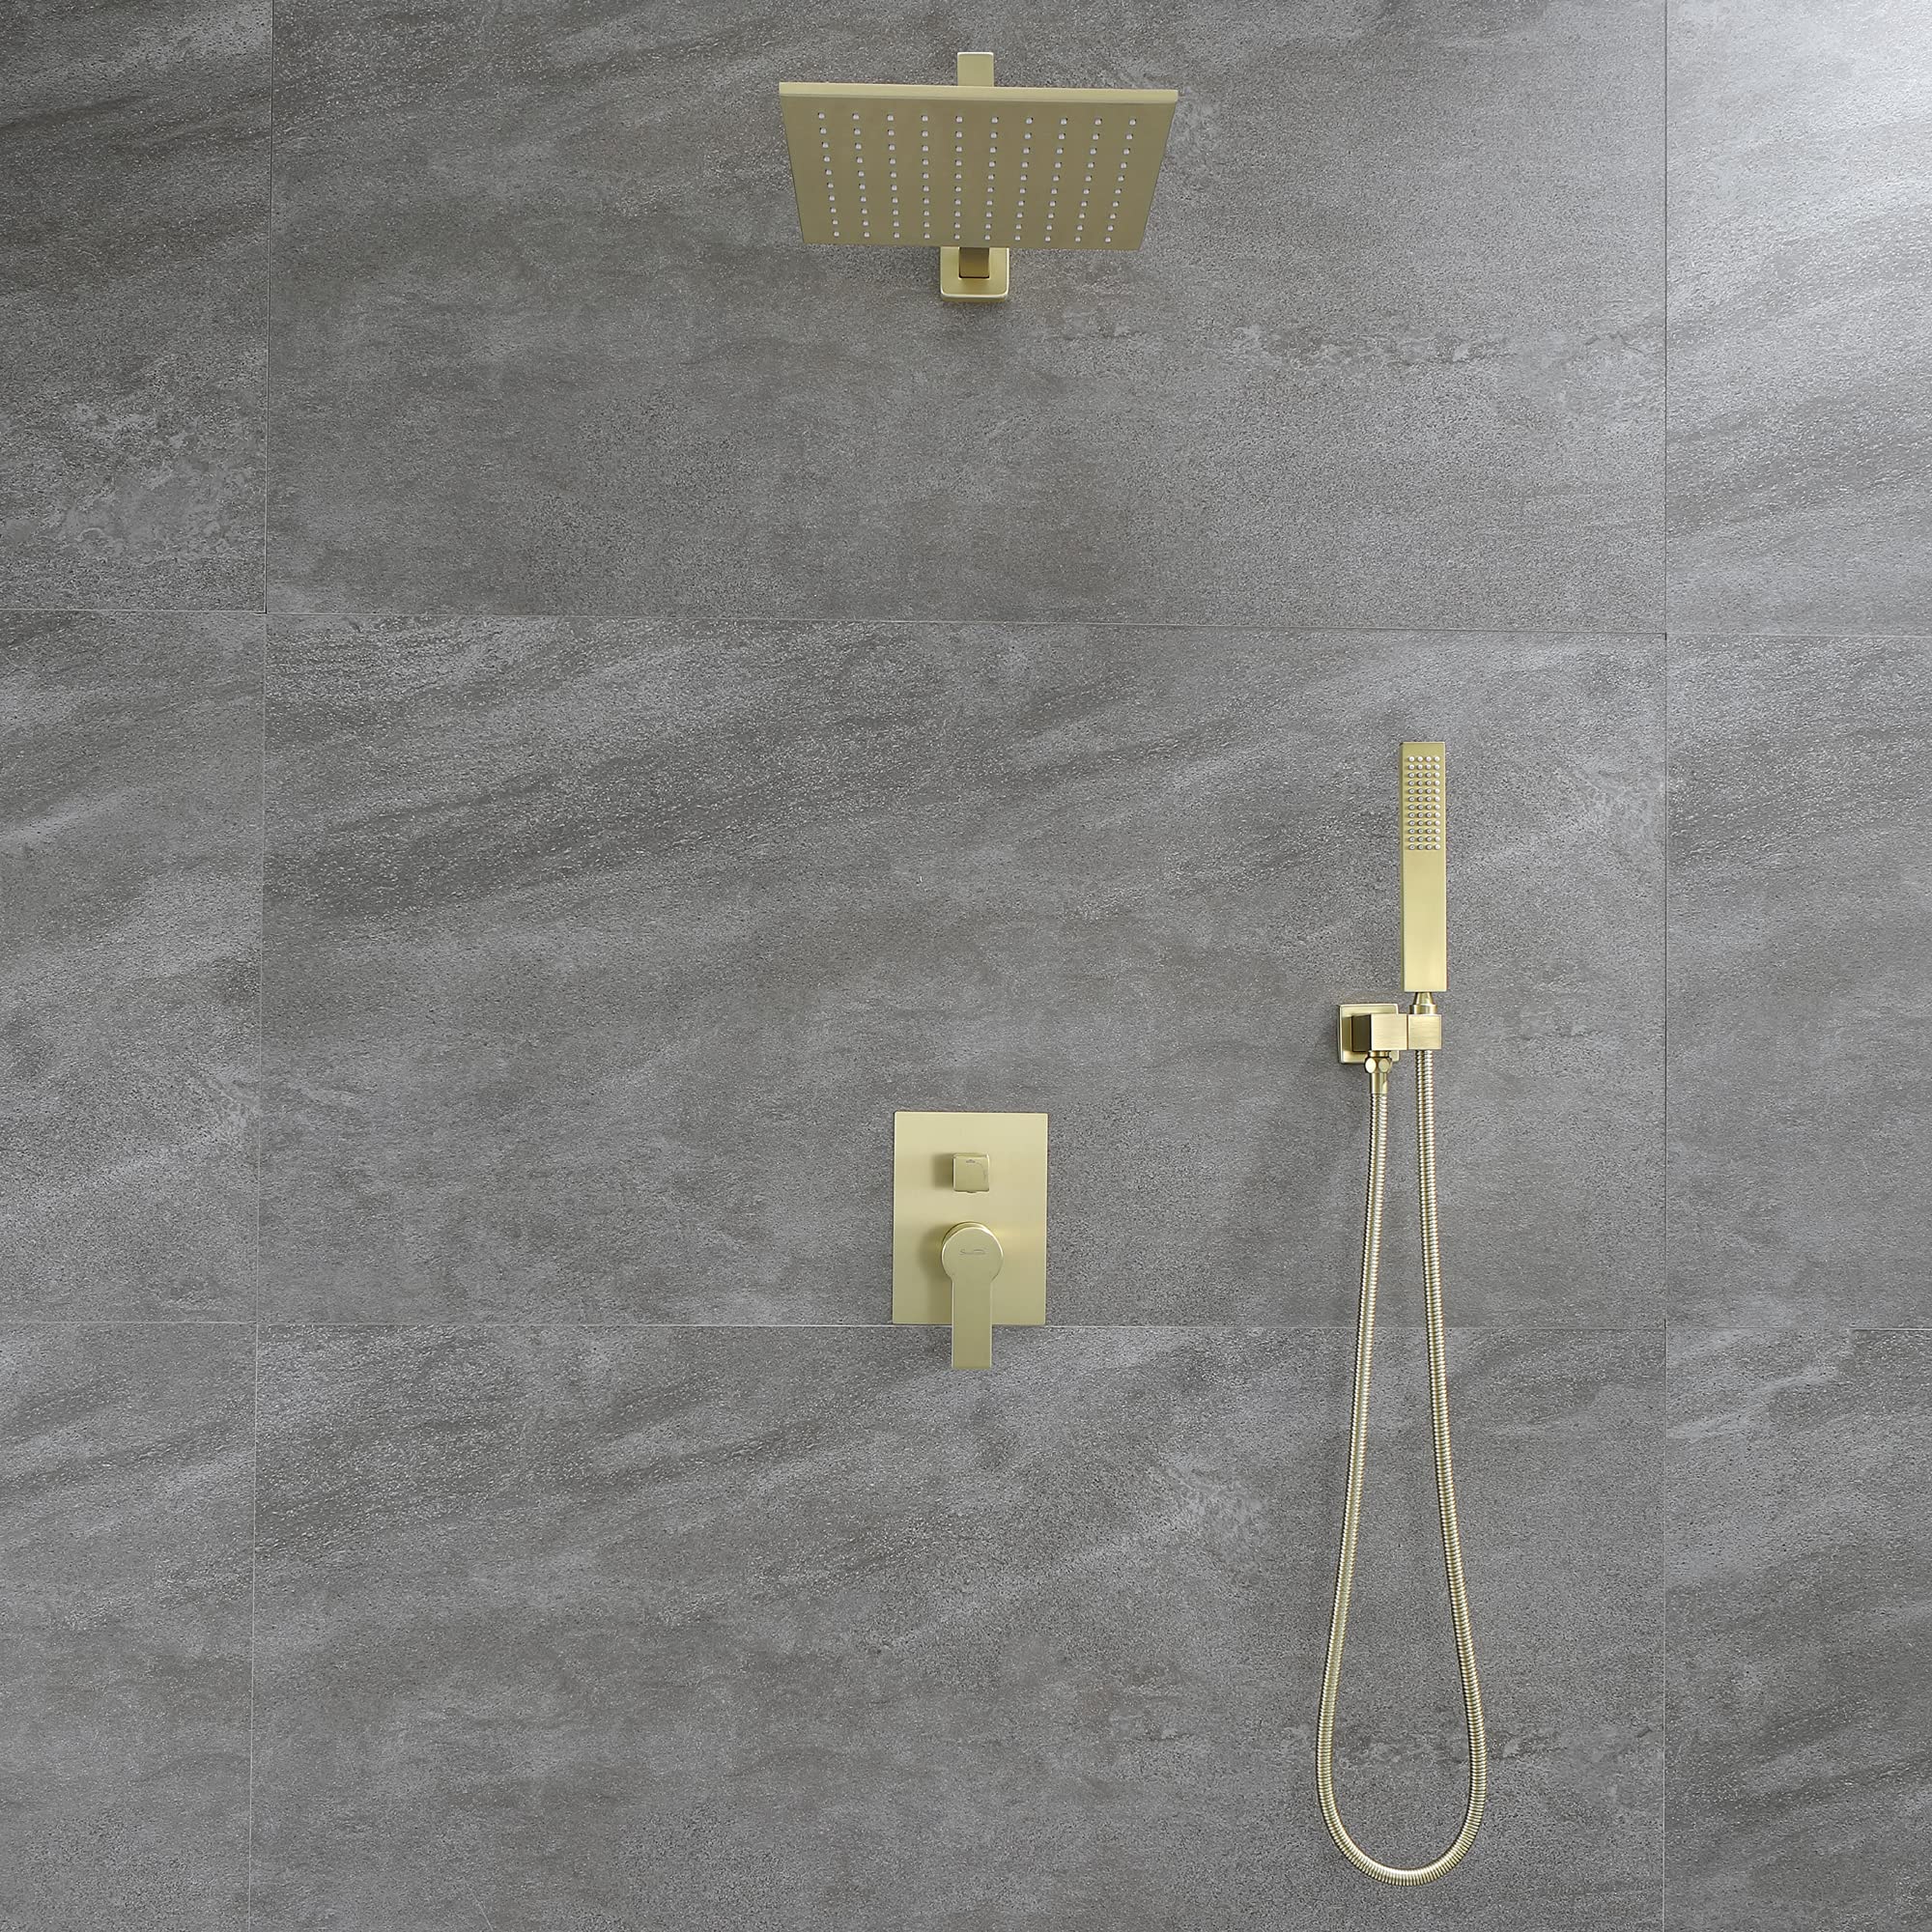 SHAMANDA Brass Rainfall Shower System, Luxuly Bathroom Shower Faucet Combo Set Brushed Gold(Including Rough-In Valve Body and Trim), L70001-3